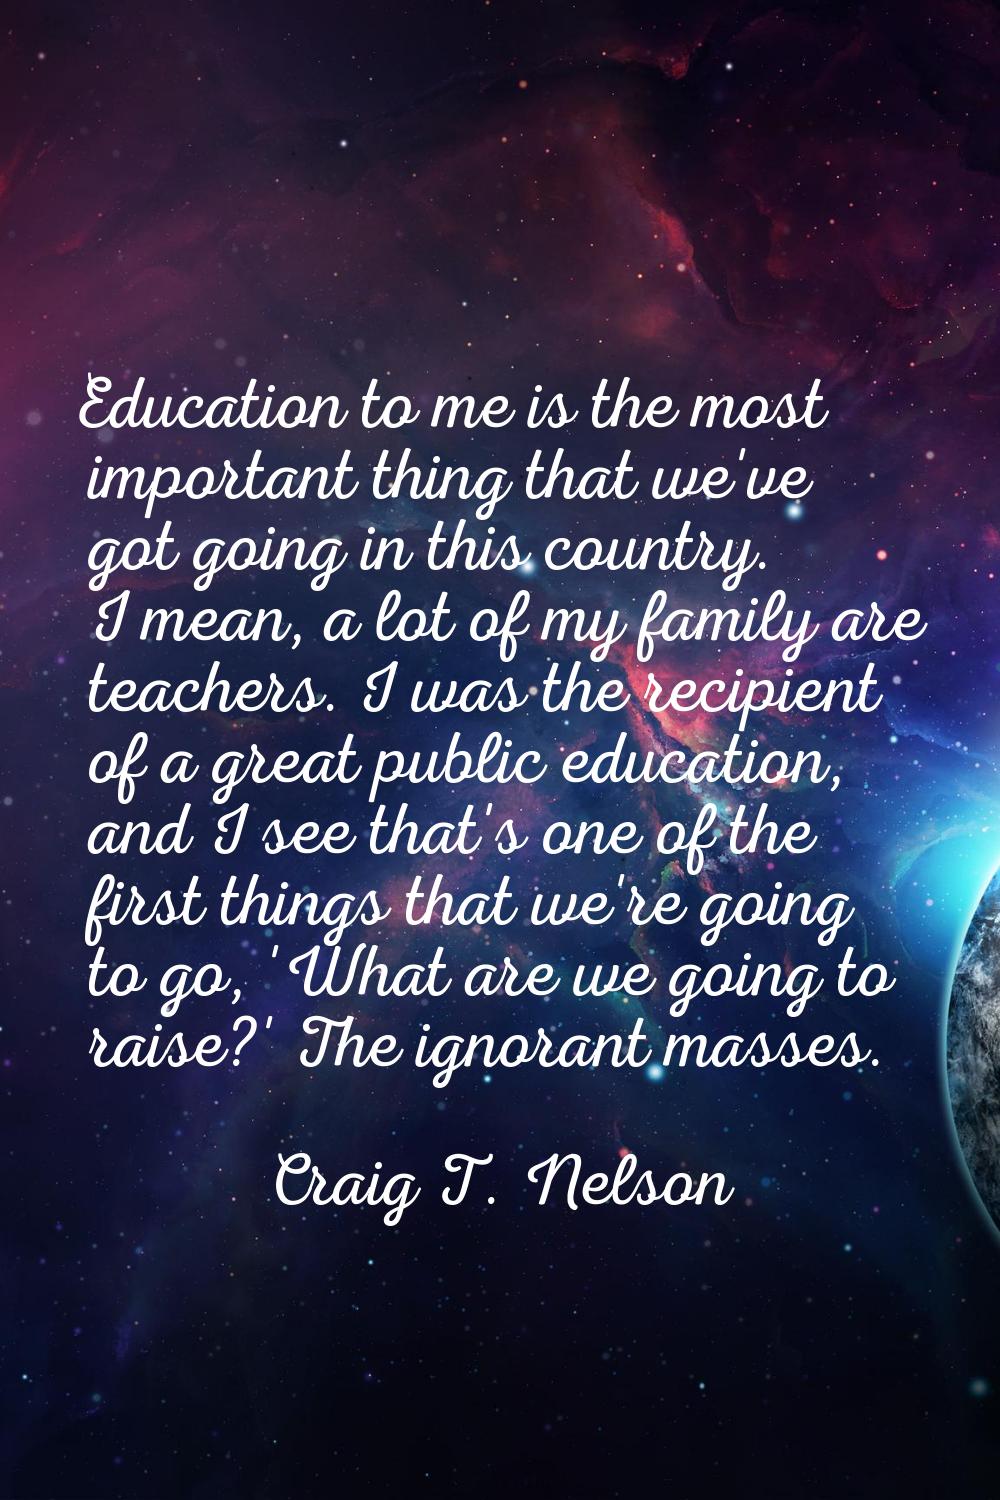 Education to me is the most important thing that we've got going in this country. I mean, a lot of 